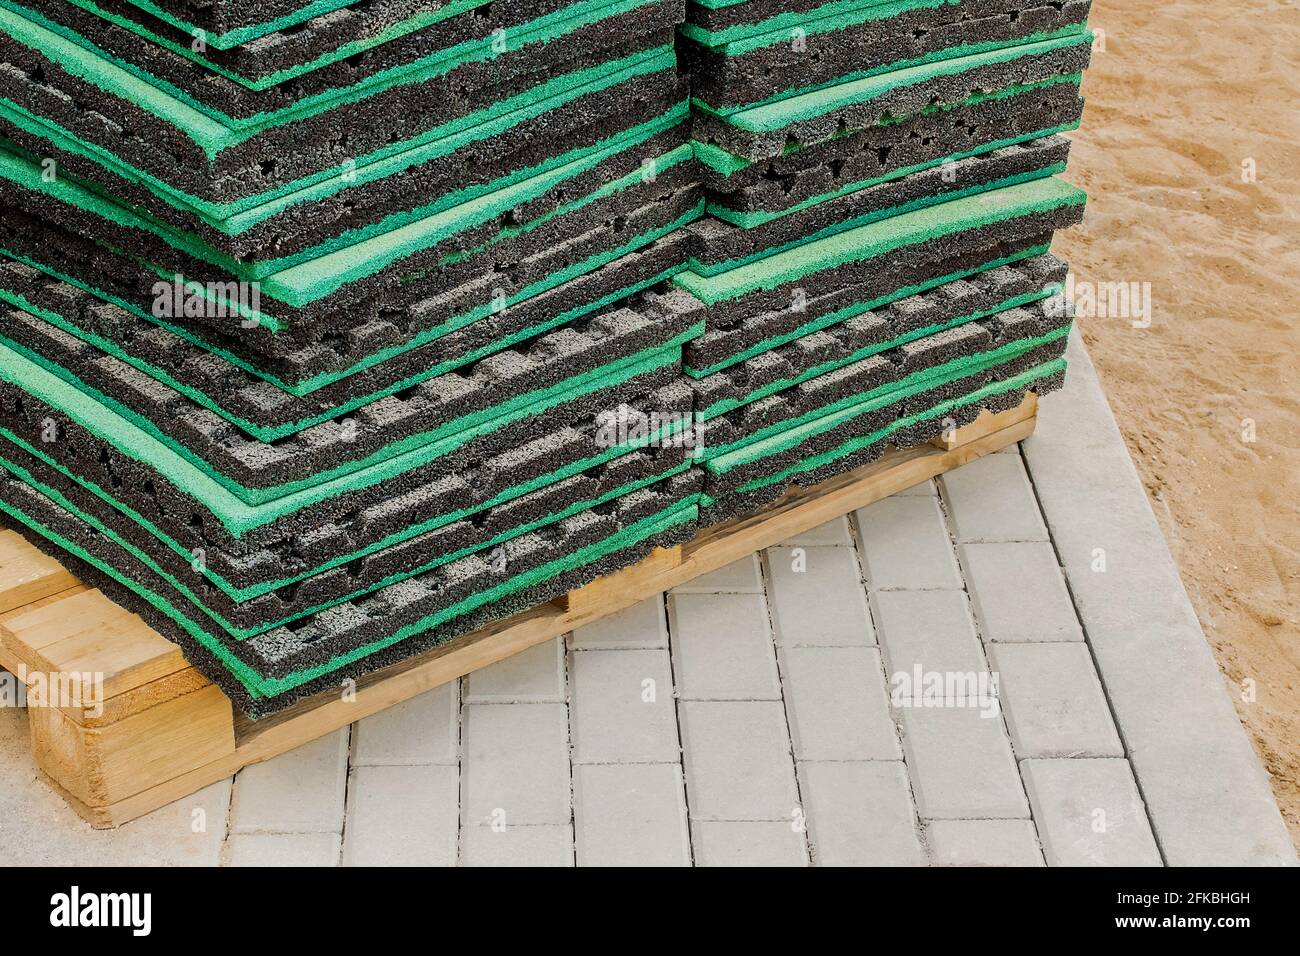 Thermal insulation or soundproof industrial building material on wooden pallet and paving slabs background, close up. Stock Photo